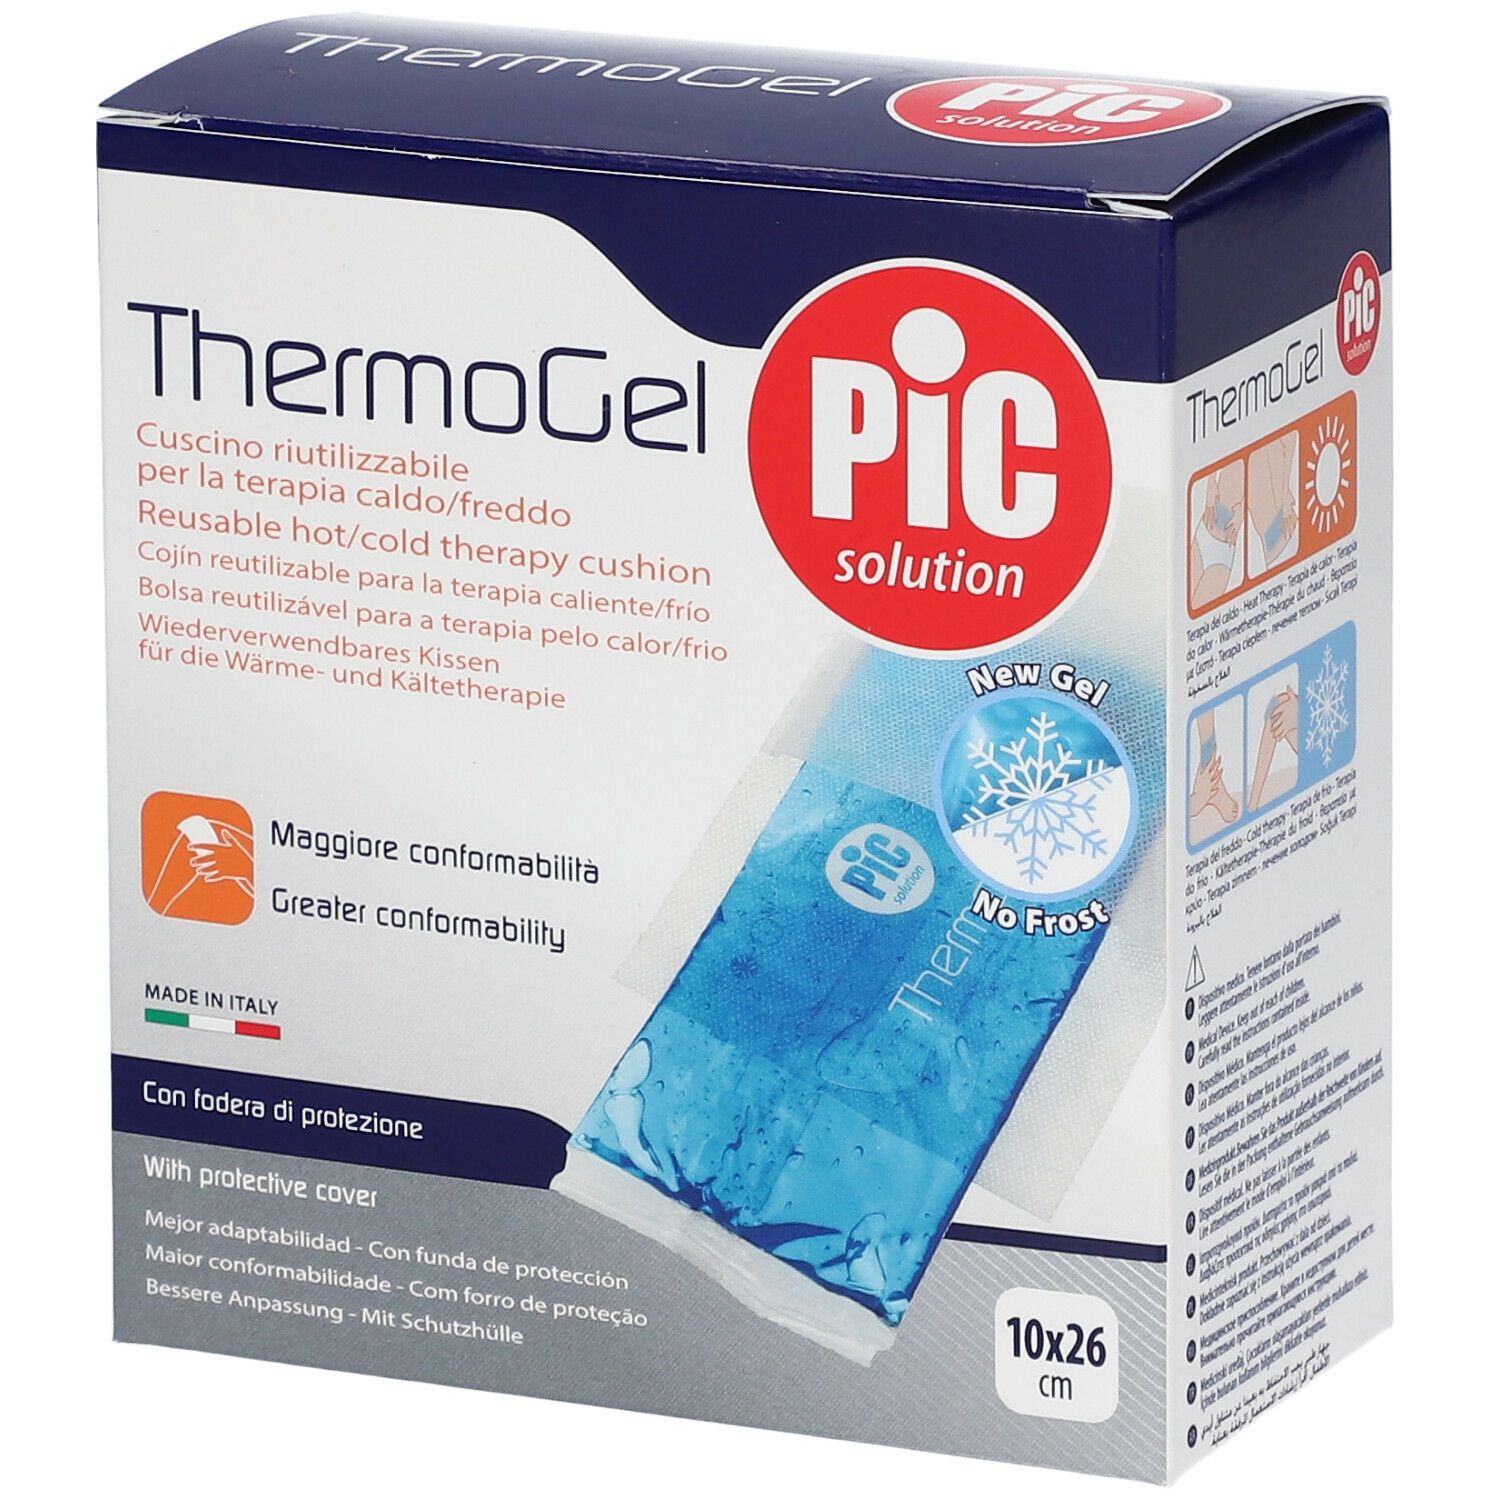 Pic ThermoGel 10x26 cm